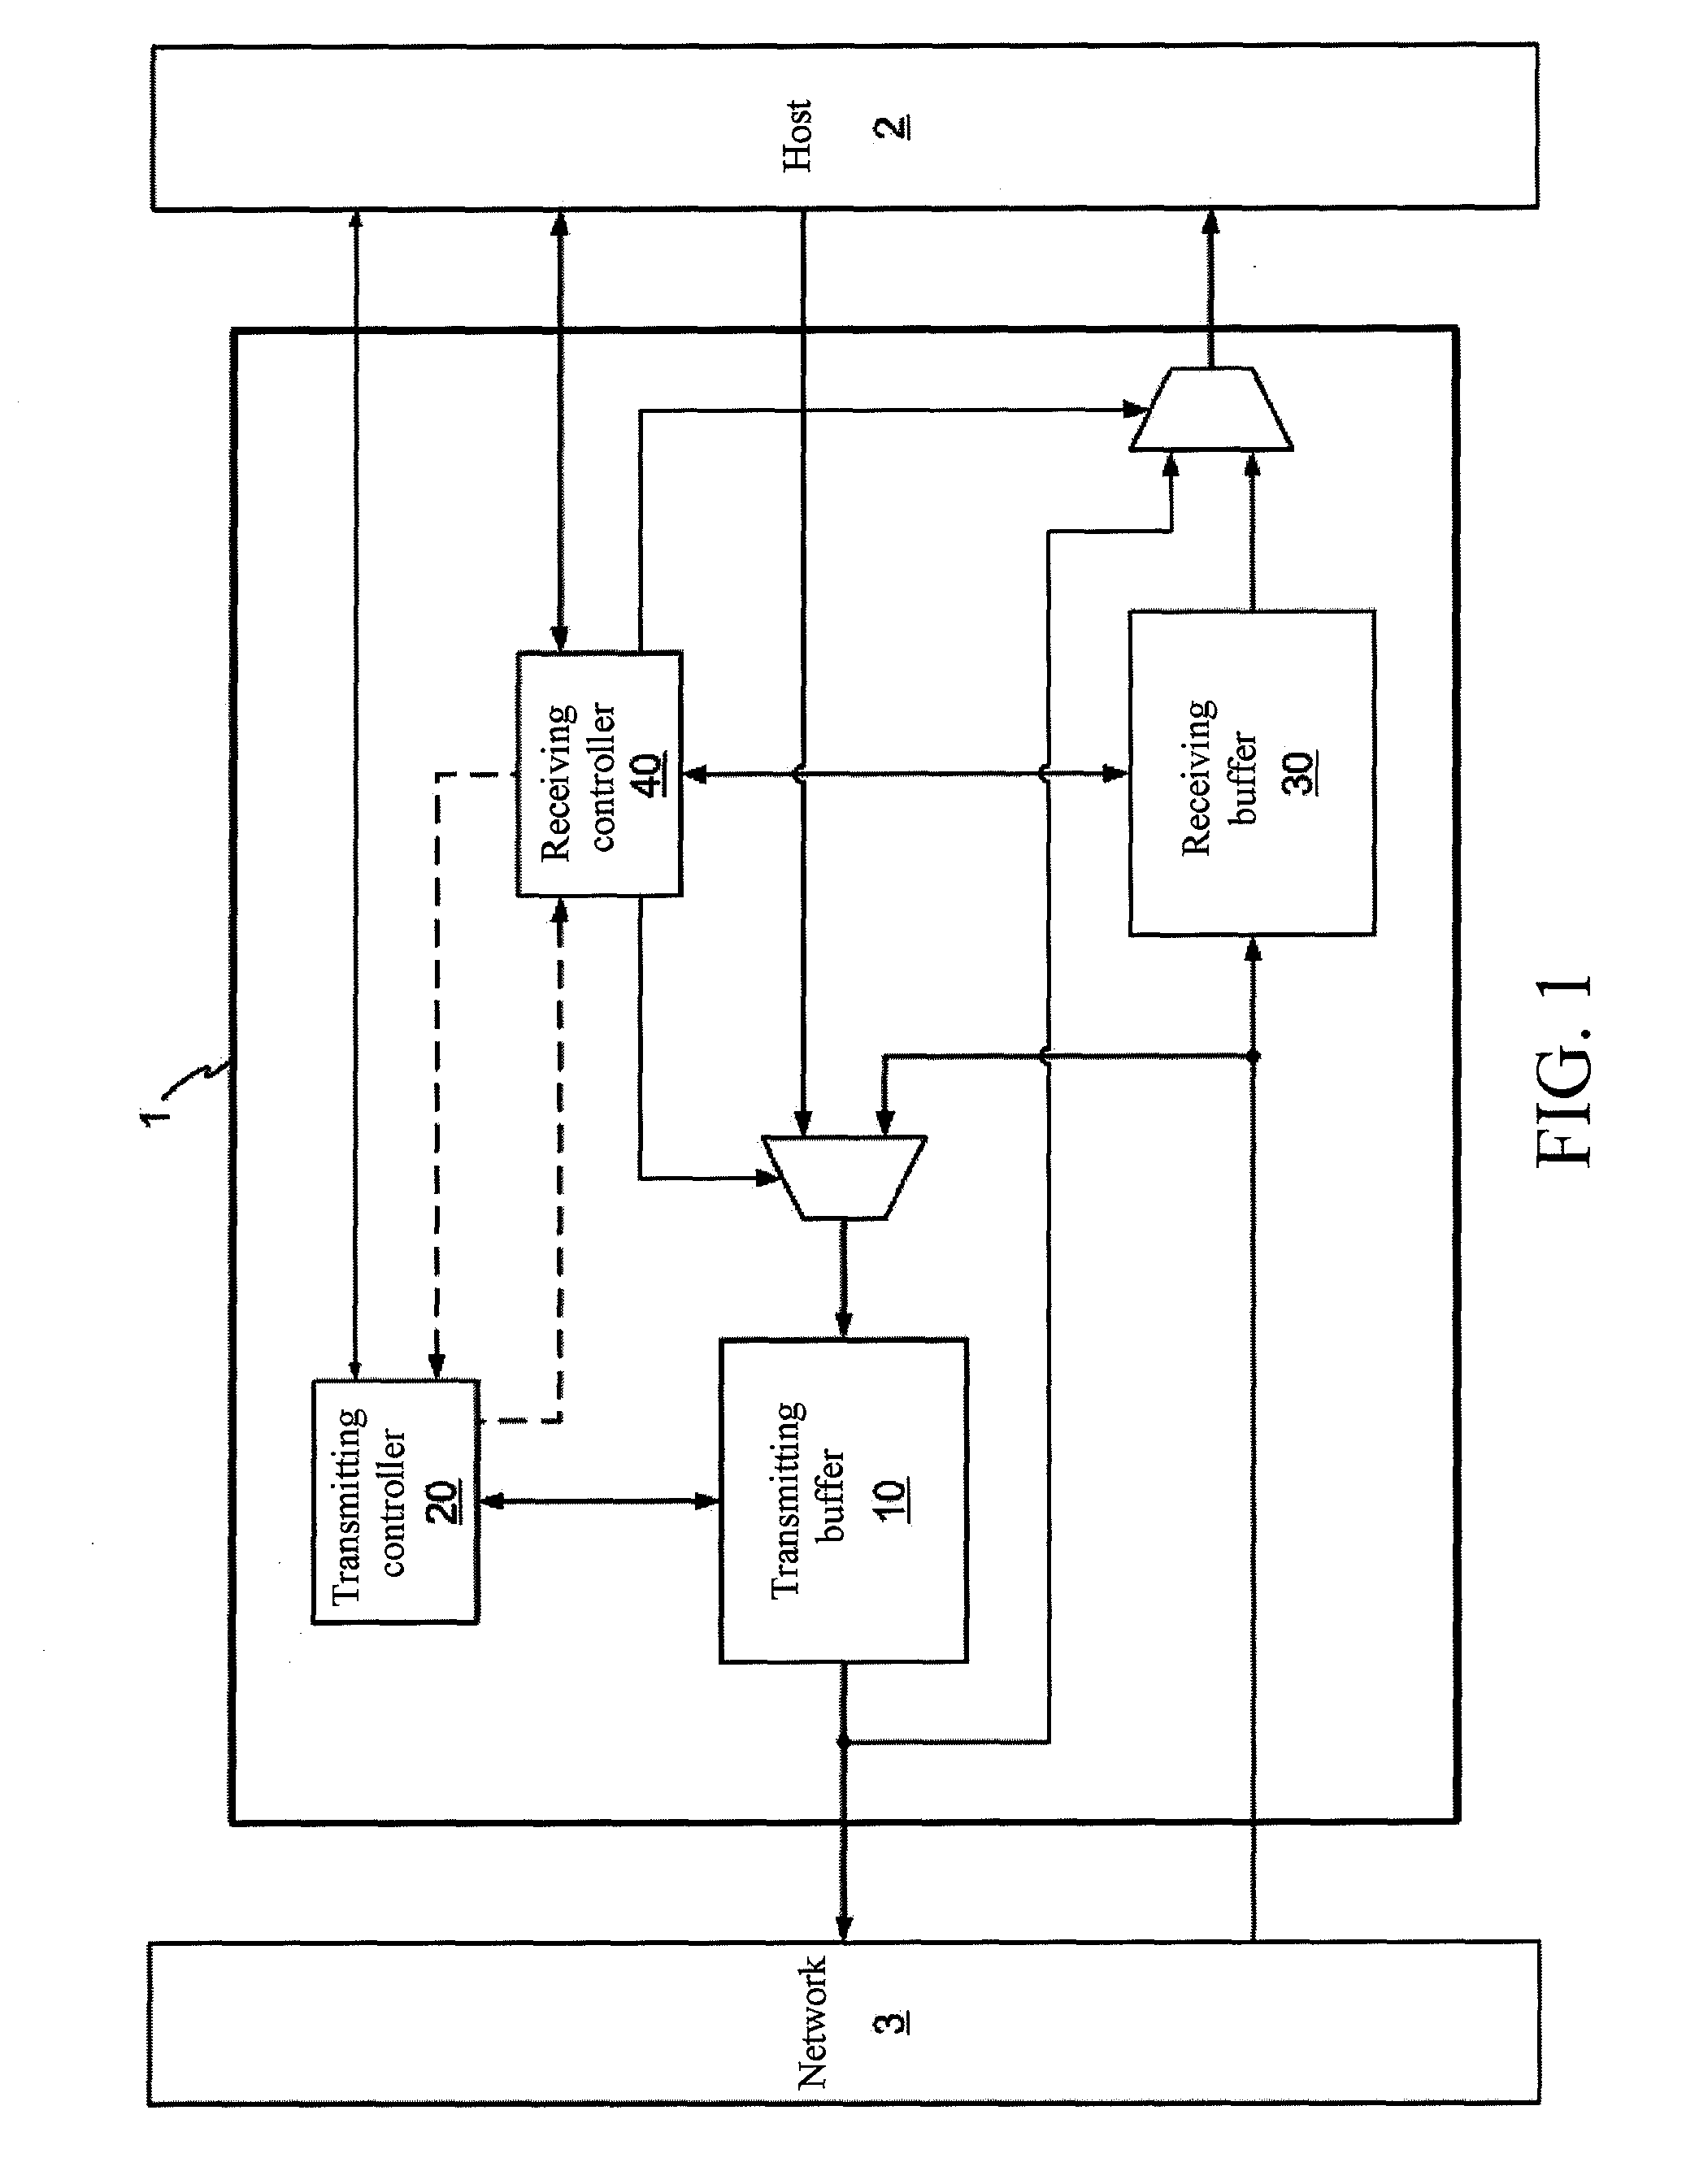 Network interface controller capable of sharing buffers and buffer sharing method